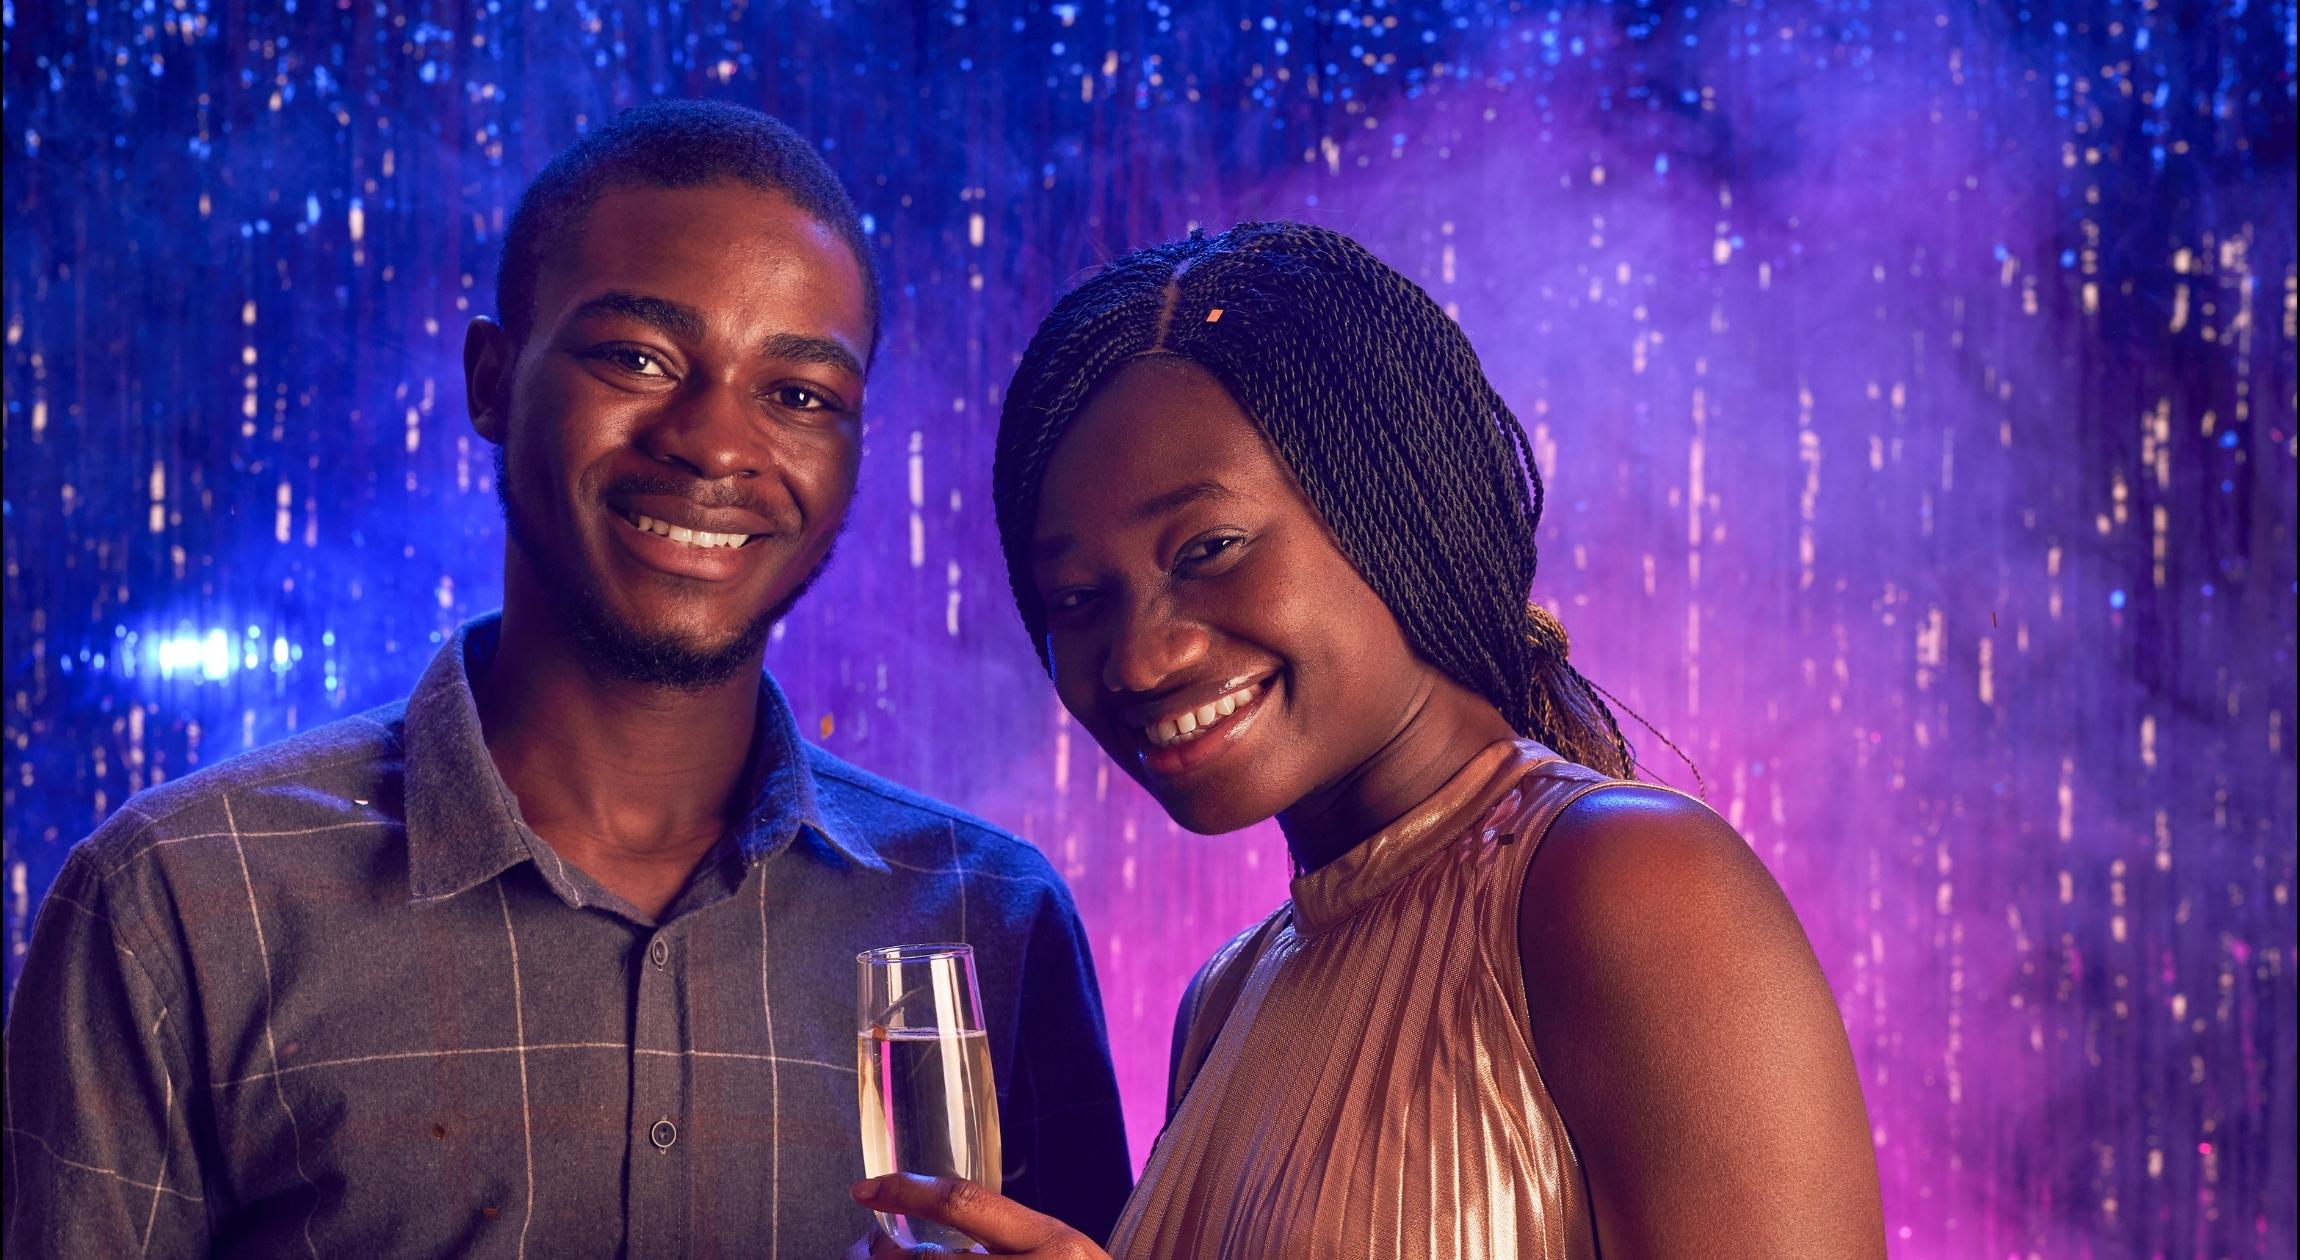 A Black couple standing in front of a purple blue background